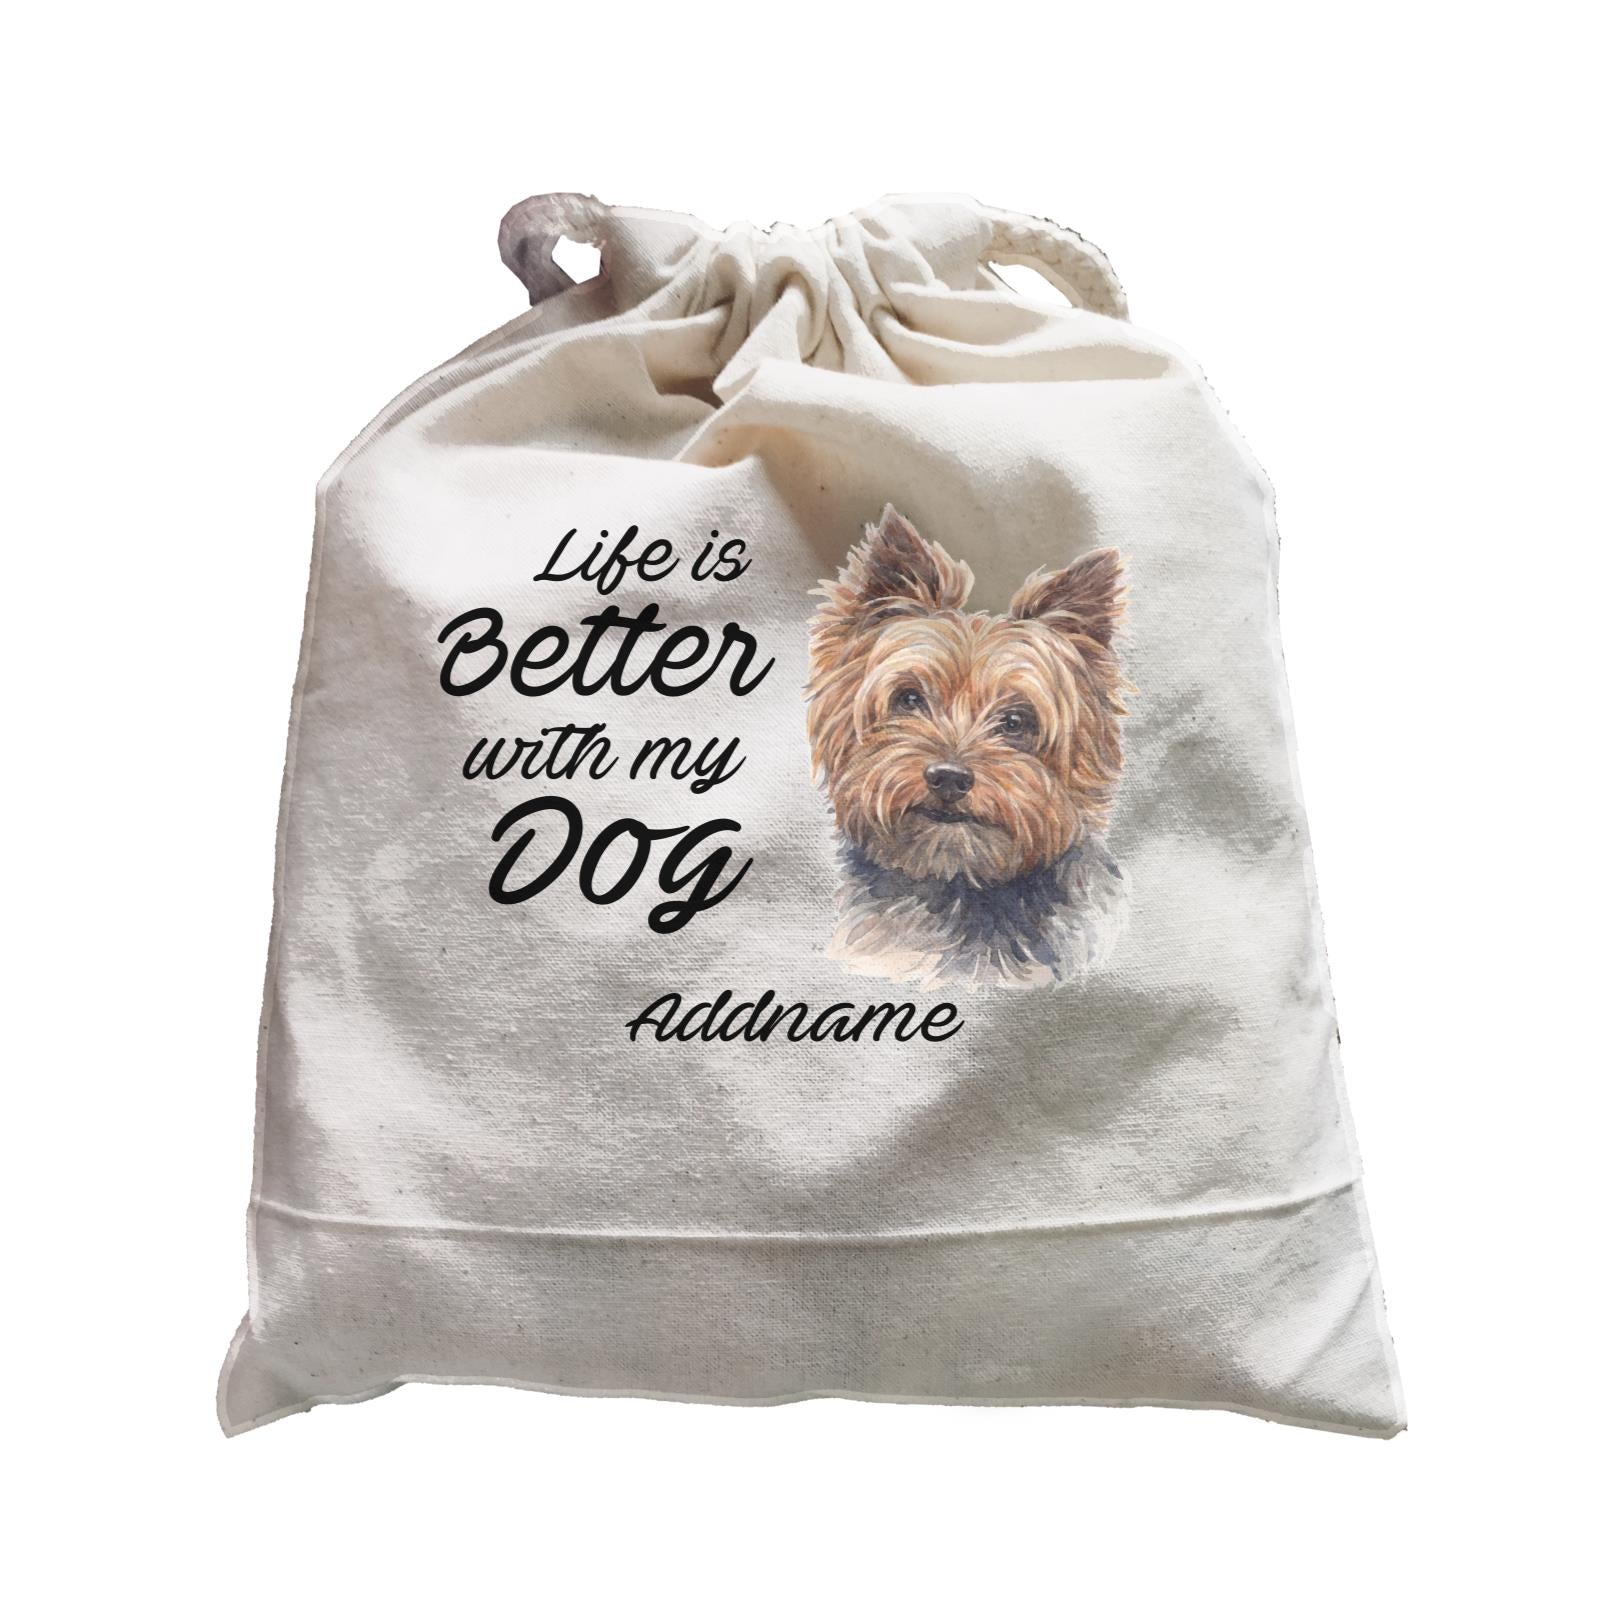 Watercolor Life is Better With My Dog Yorkshire Terrier Addname Satchel